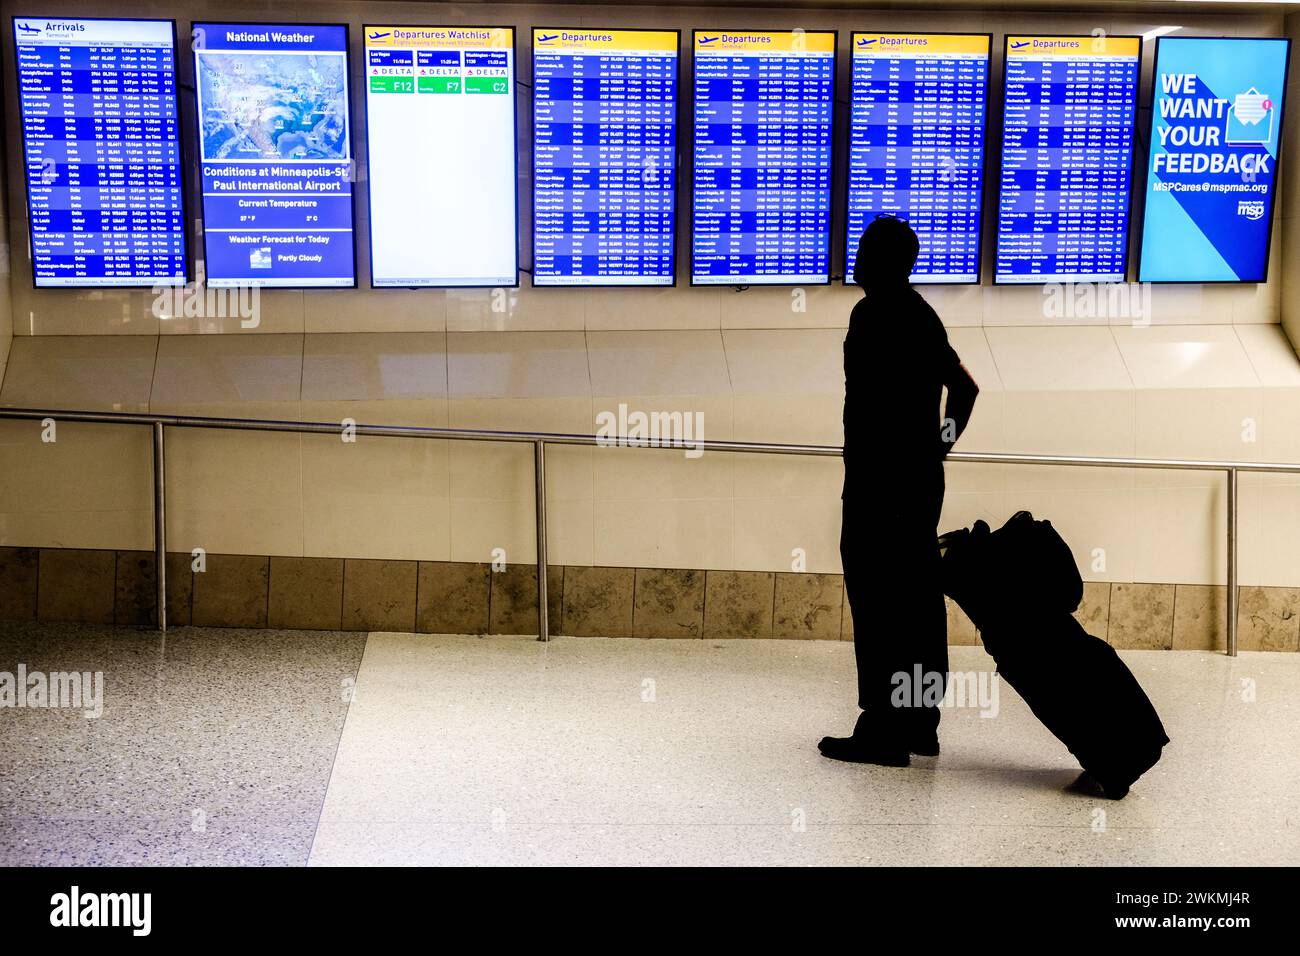 Air travelers and the arrival-departure display at the Minneapolis-St. Paul airport, USA (MSP) during a typical airport travel day. Stock Photo